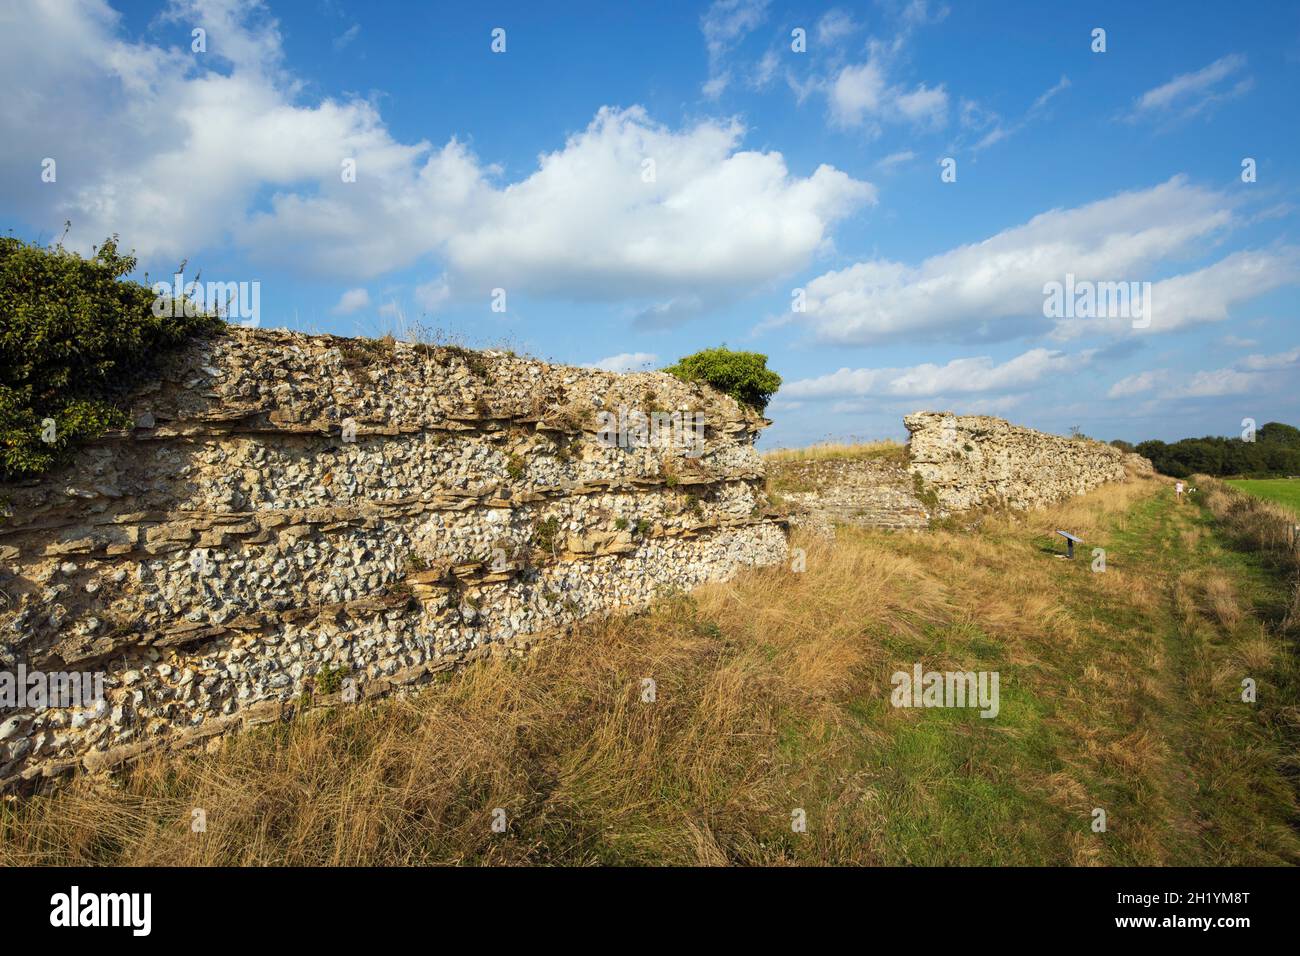 Remains of the Roman town walls, Silchester, Hampshire, England, United Kingdom, Europe Stock Photo